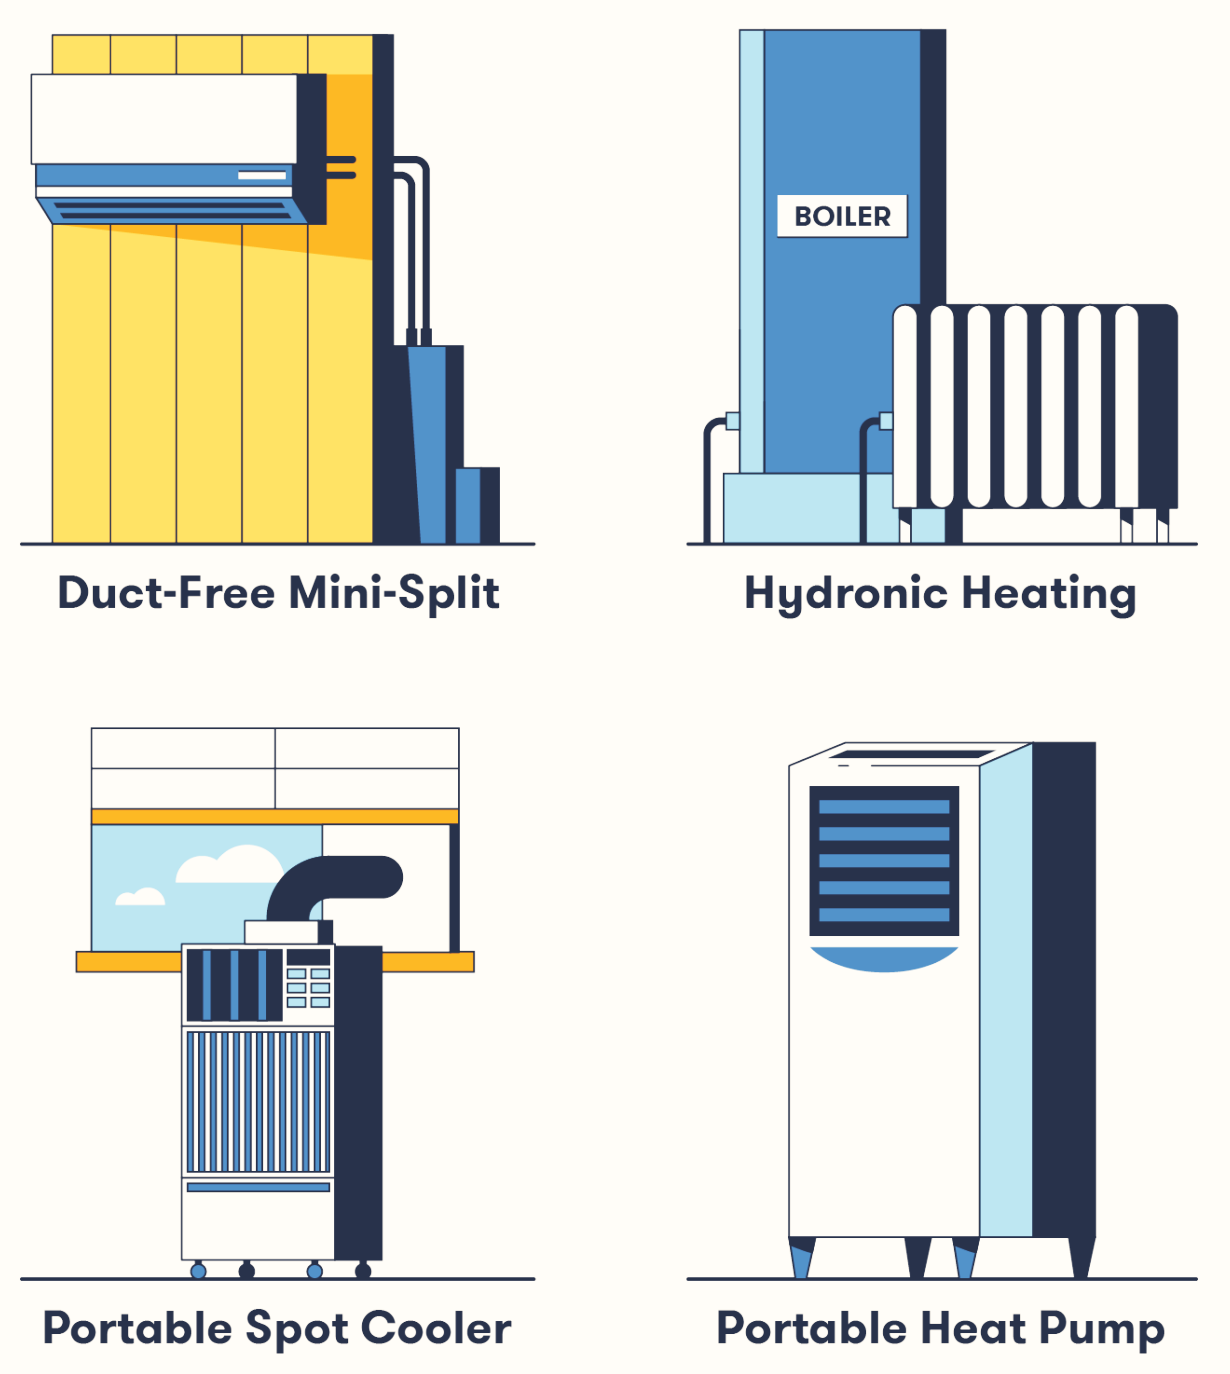 02-Ductless-HVAC@2x-1398x1536.png